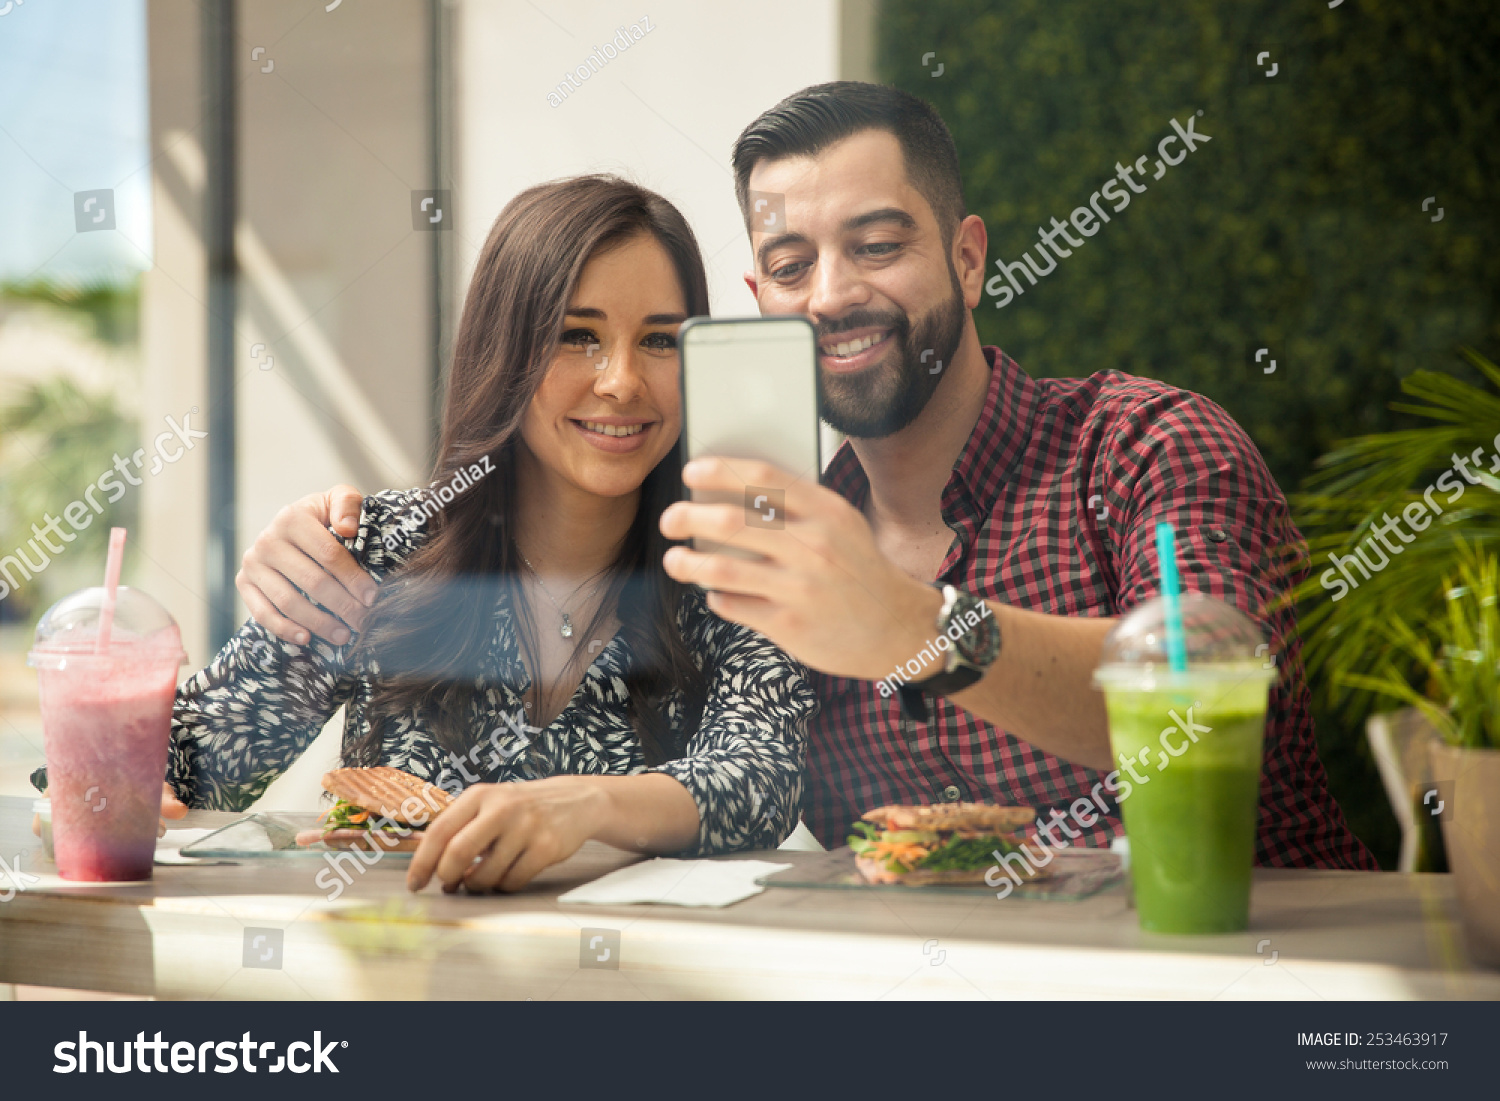 Attractive Young Hispanic Couple Taking A Selfie With A Smartphone While Eating Lunch 5889